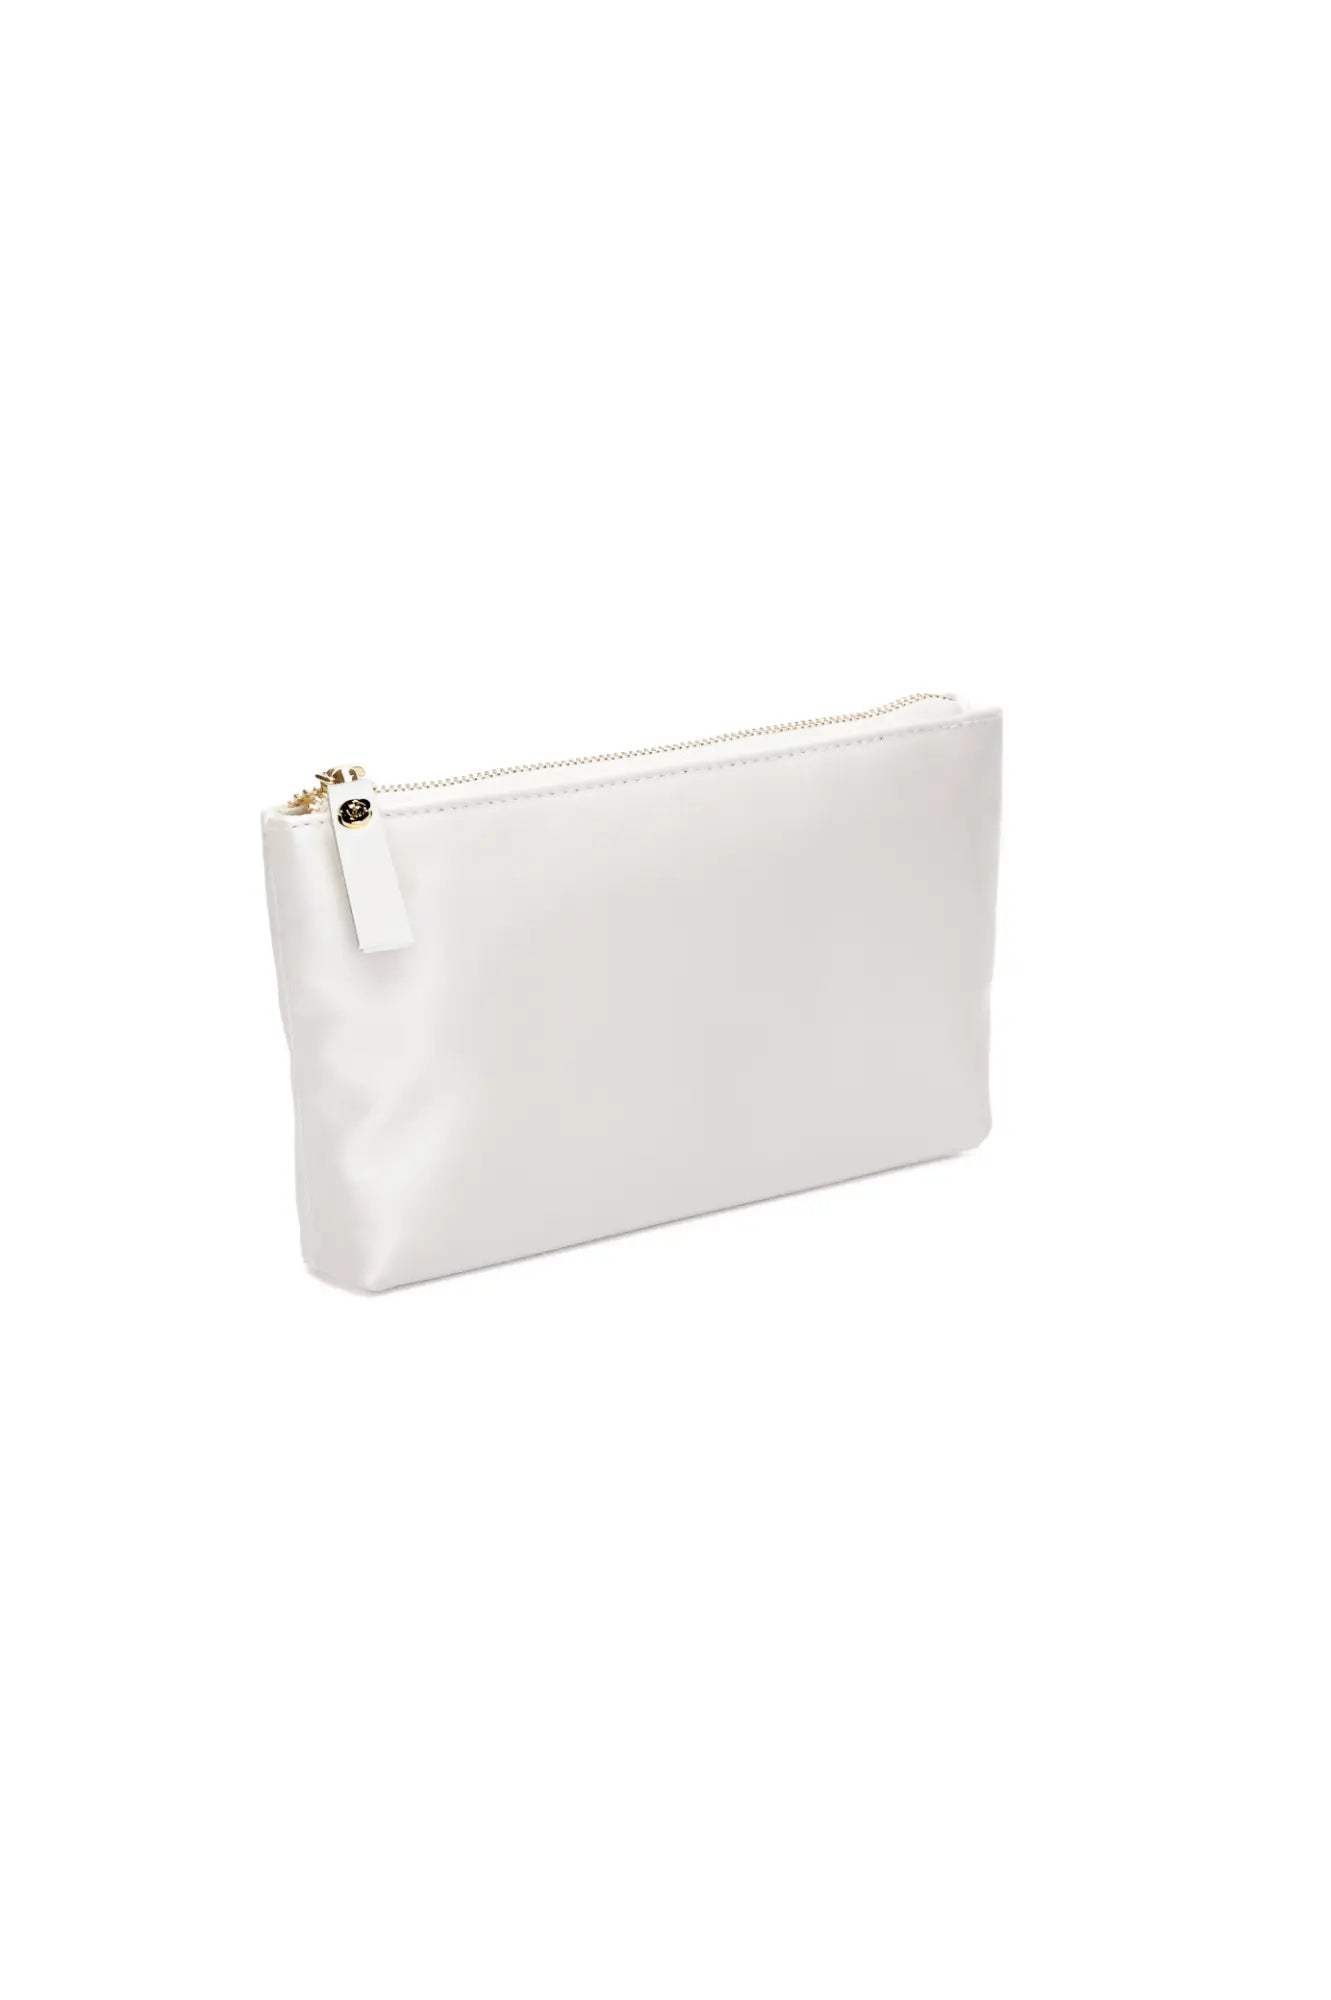 Bella Rosa Collection Mia Acrylic Clutch with Ivory Satin Zipper Pouch against a white background.